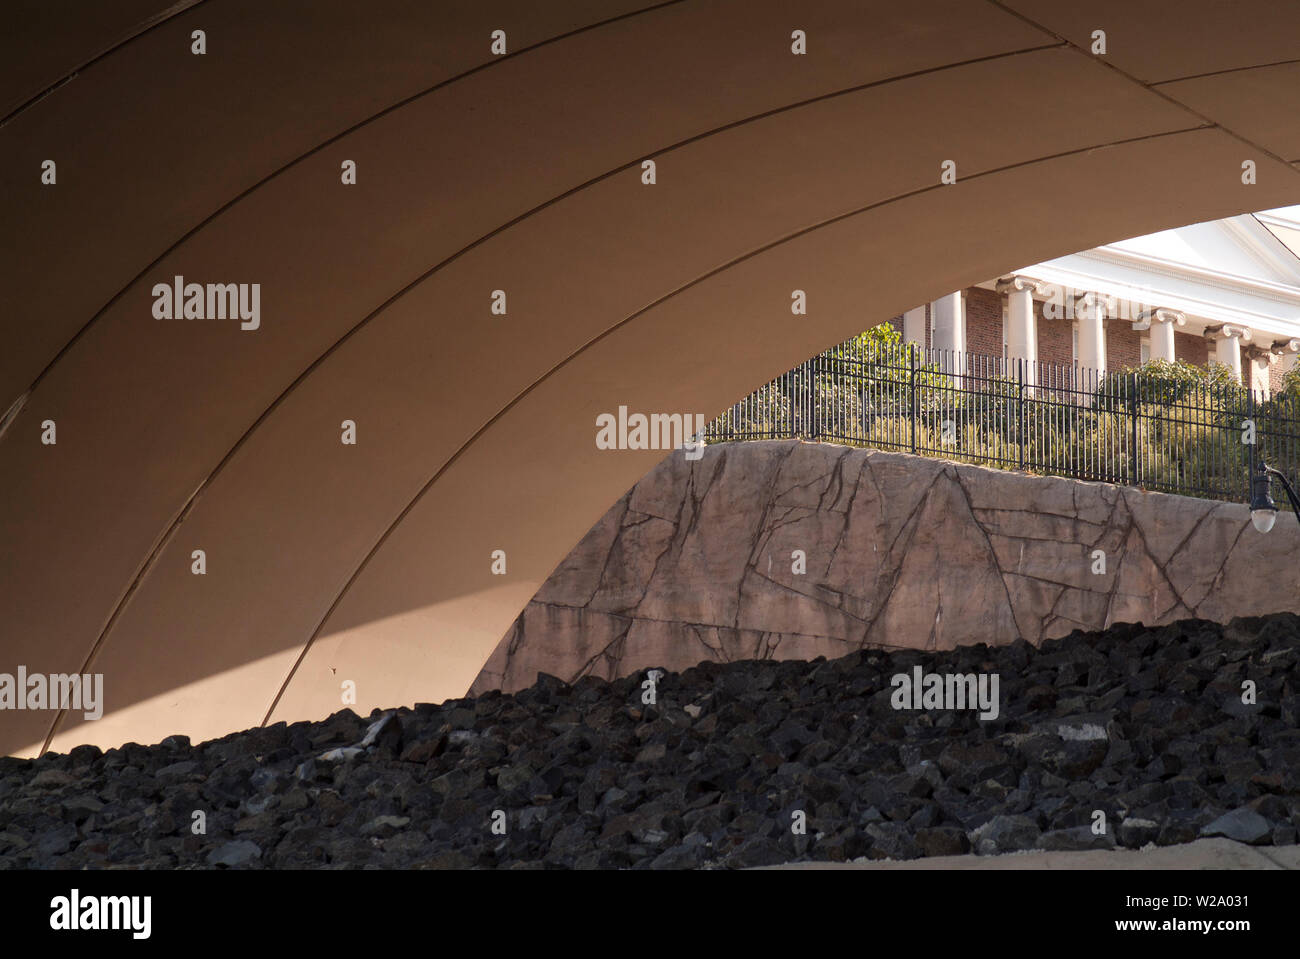 OPERA HOUSE: An amphitheater like arch is formed under an overpass from a bridge above. Stock Photo